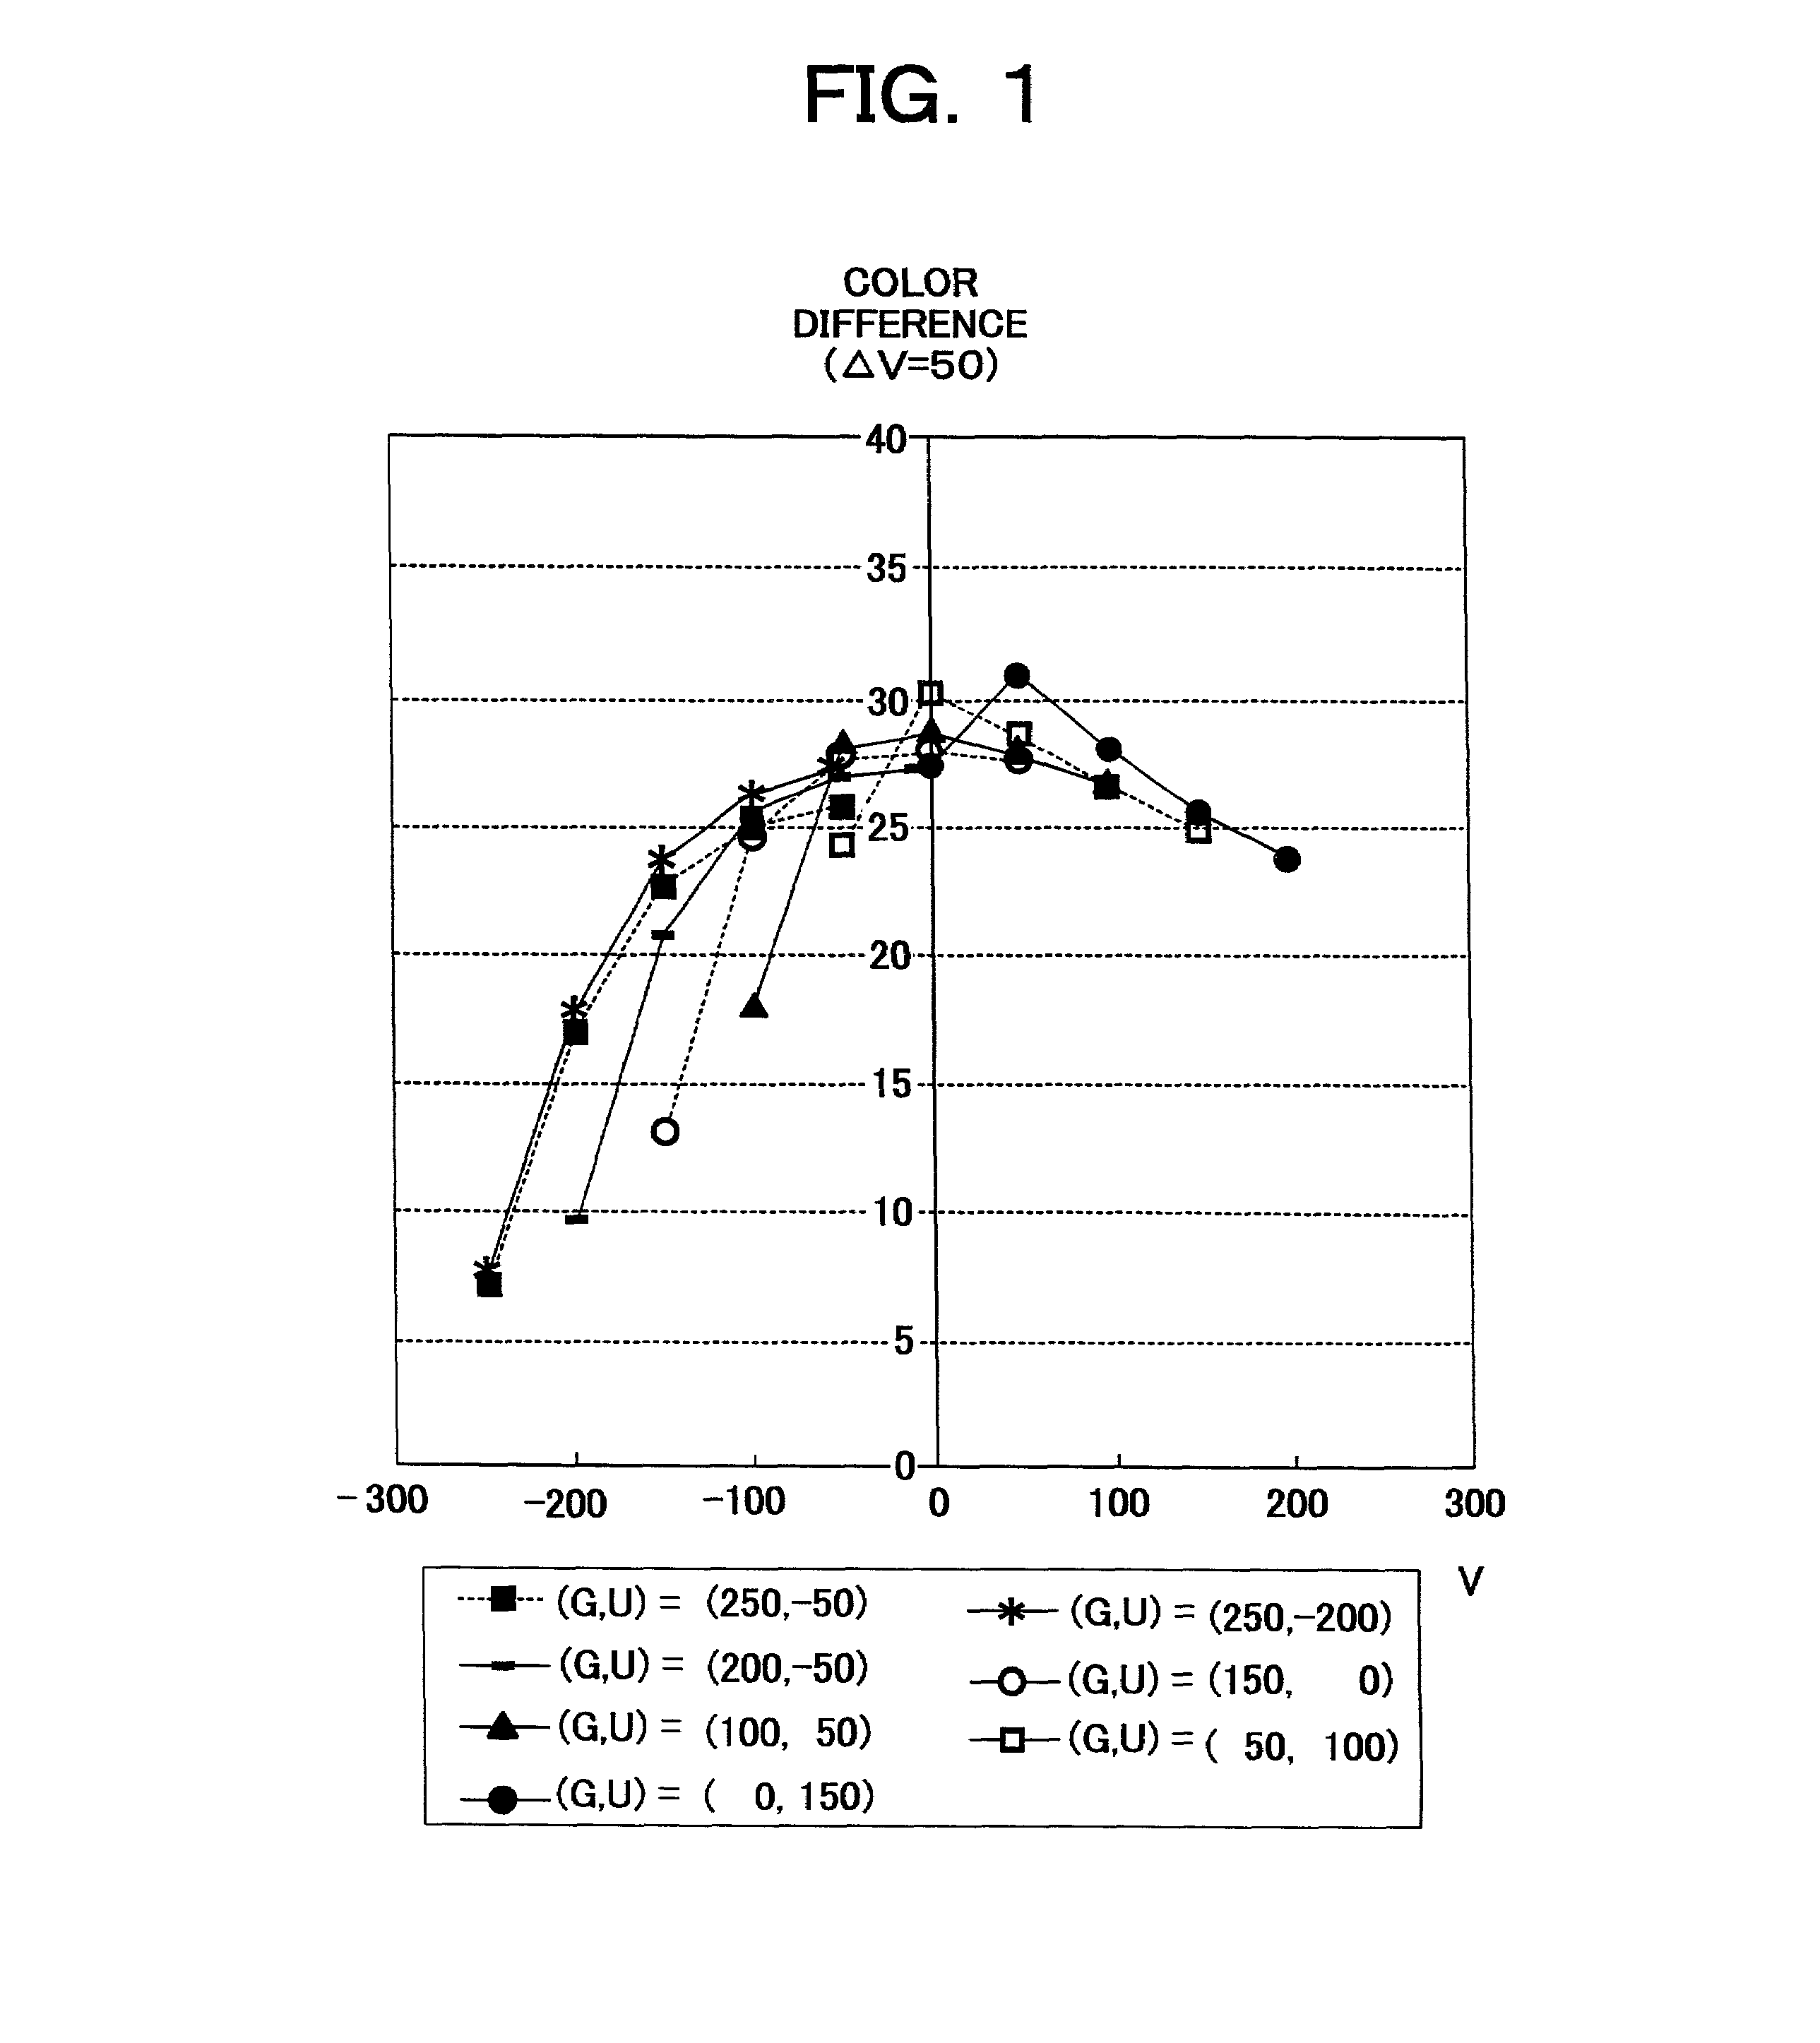 System, method and program for improved color image signal quantization